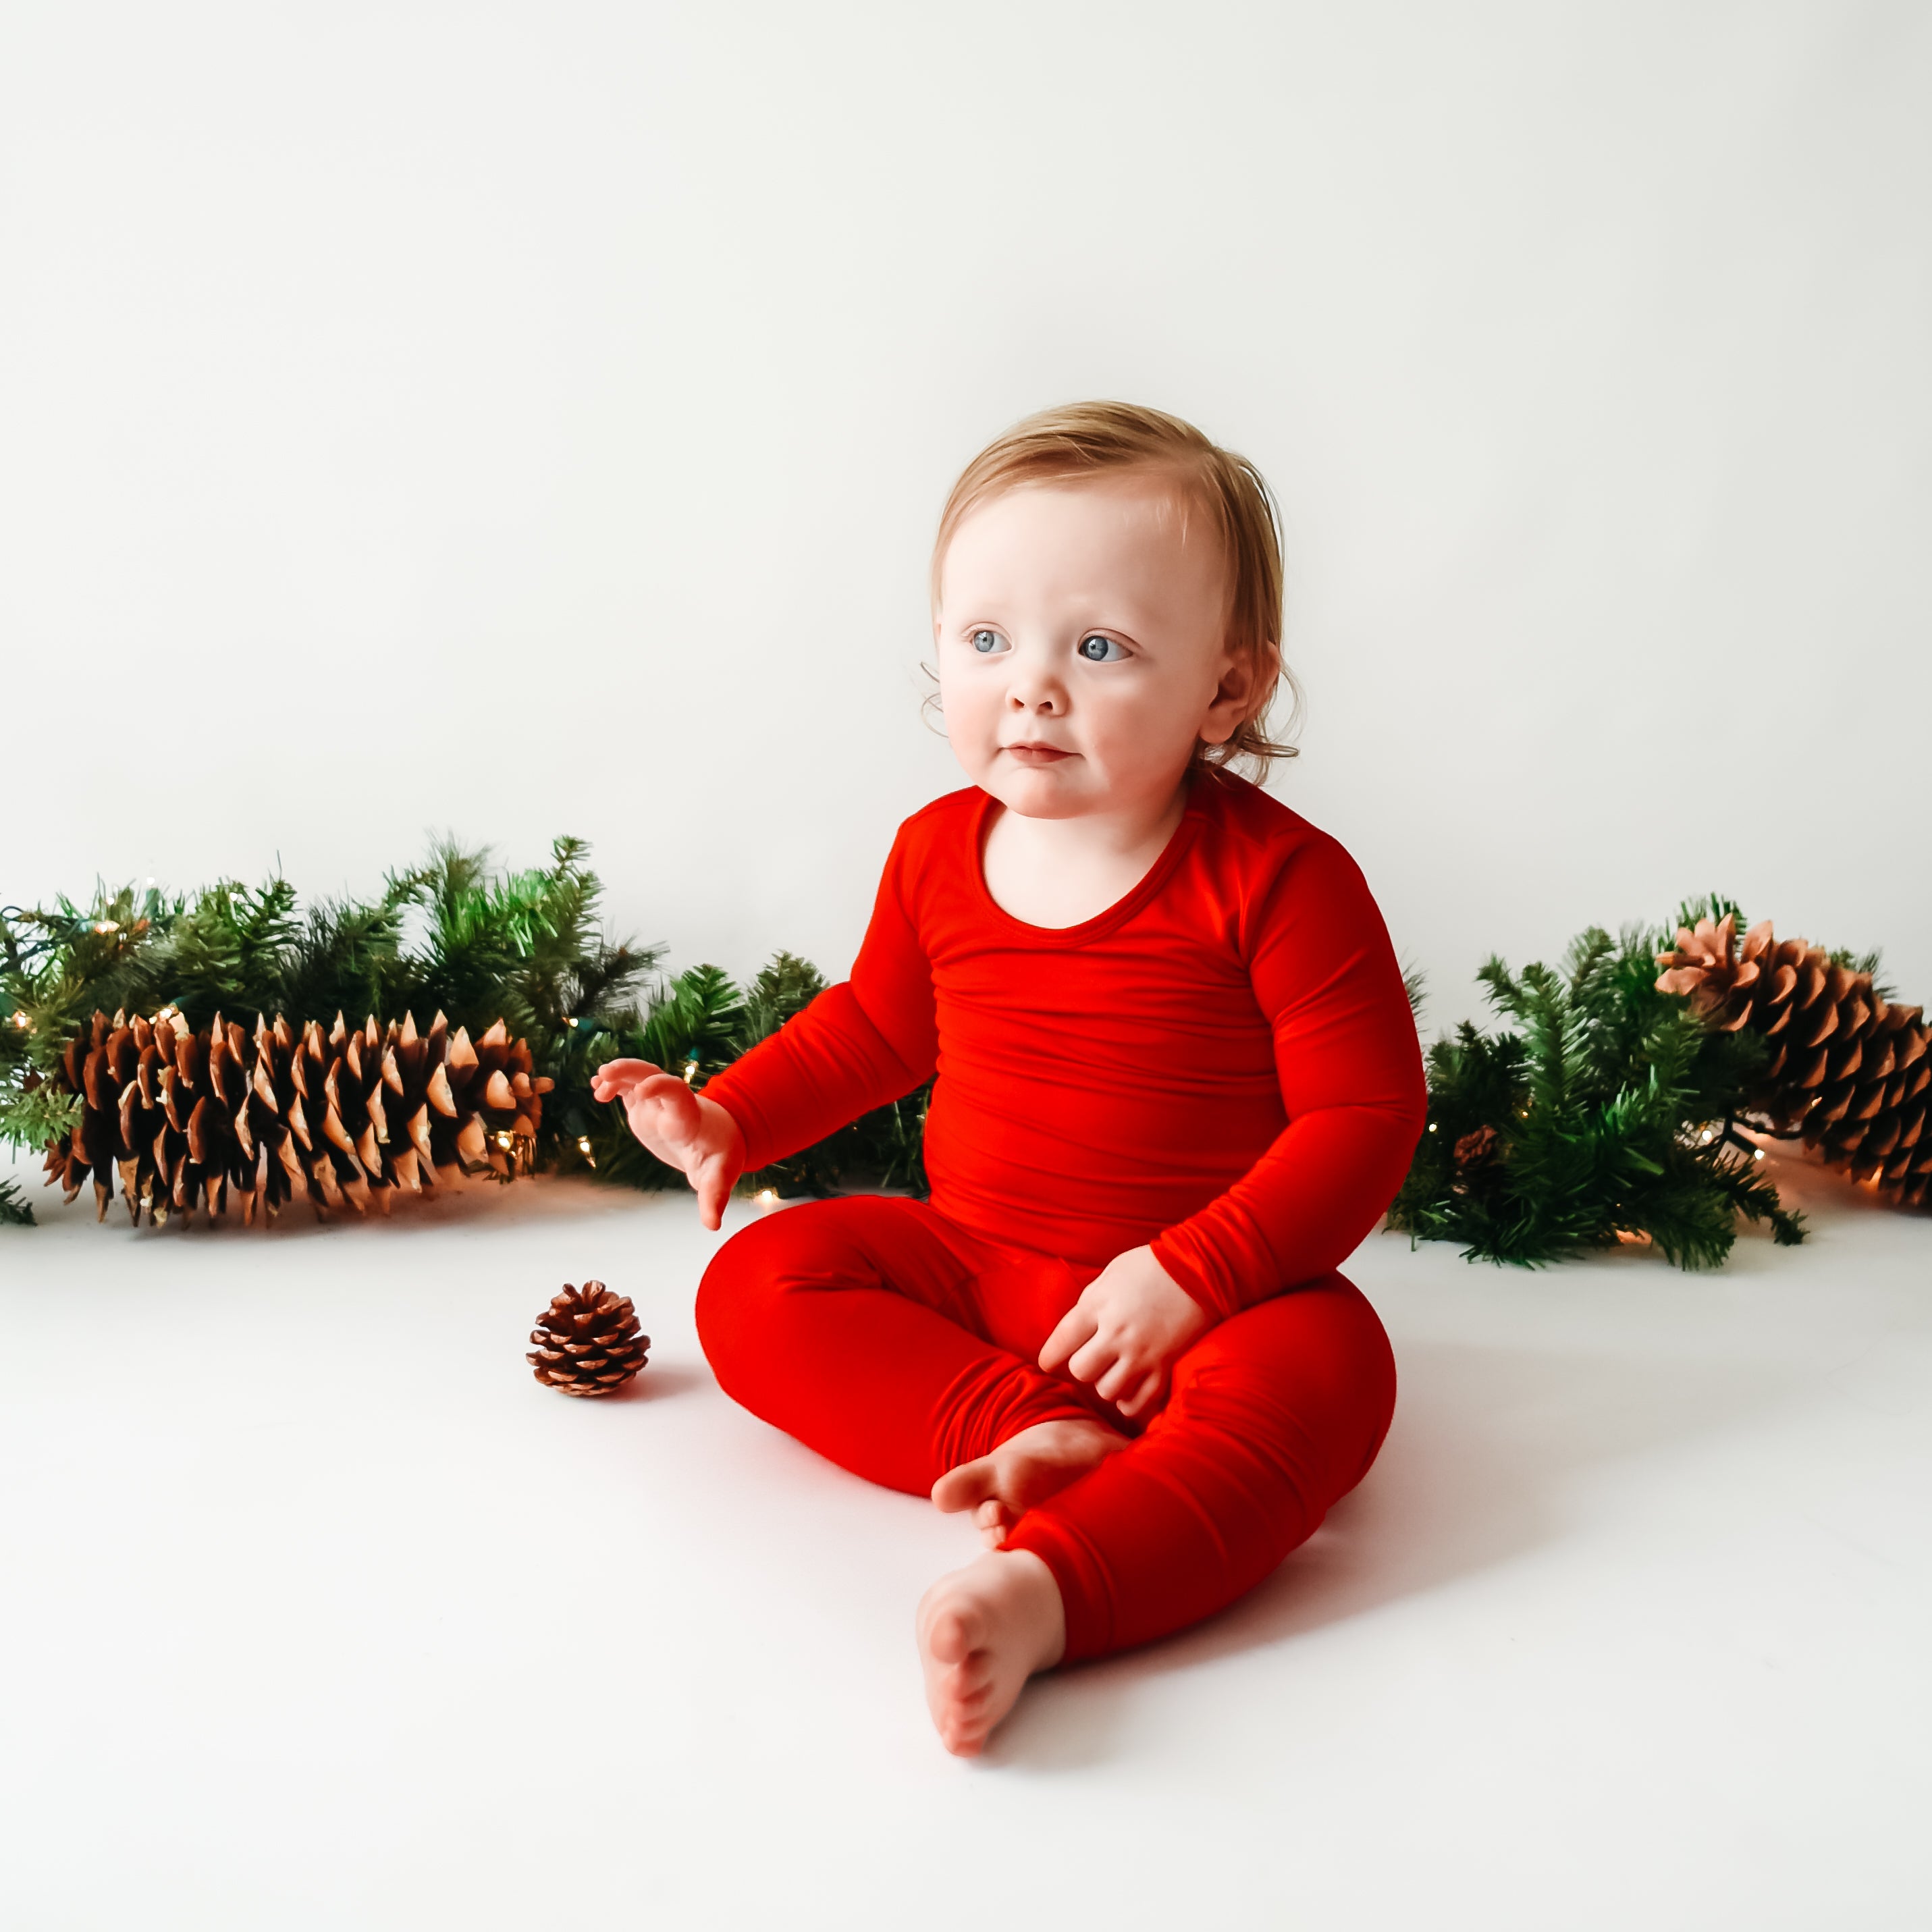 baby wearing crimson kyte baby pajamas with a pinecone garland in the background